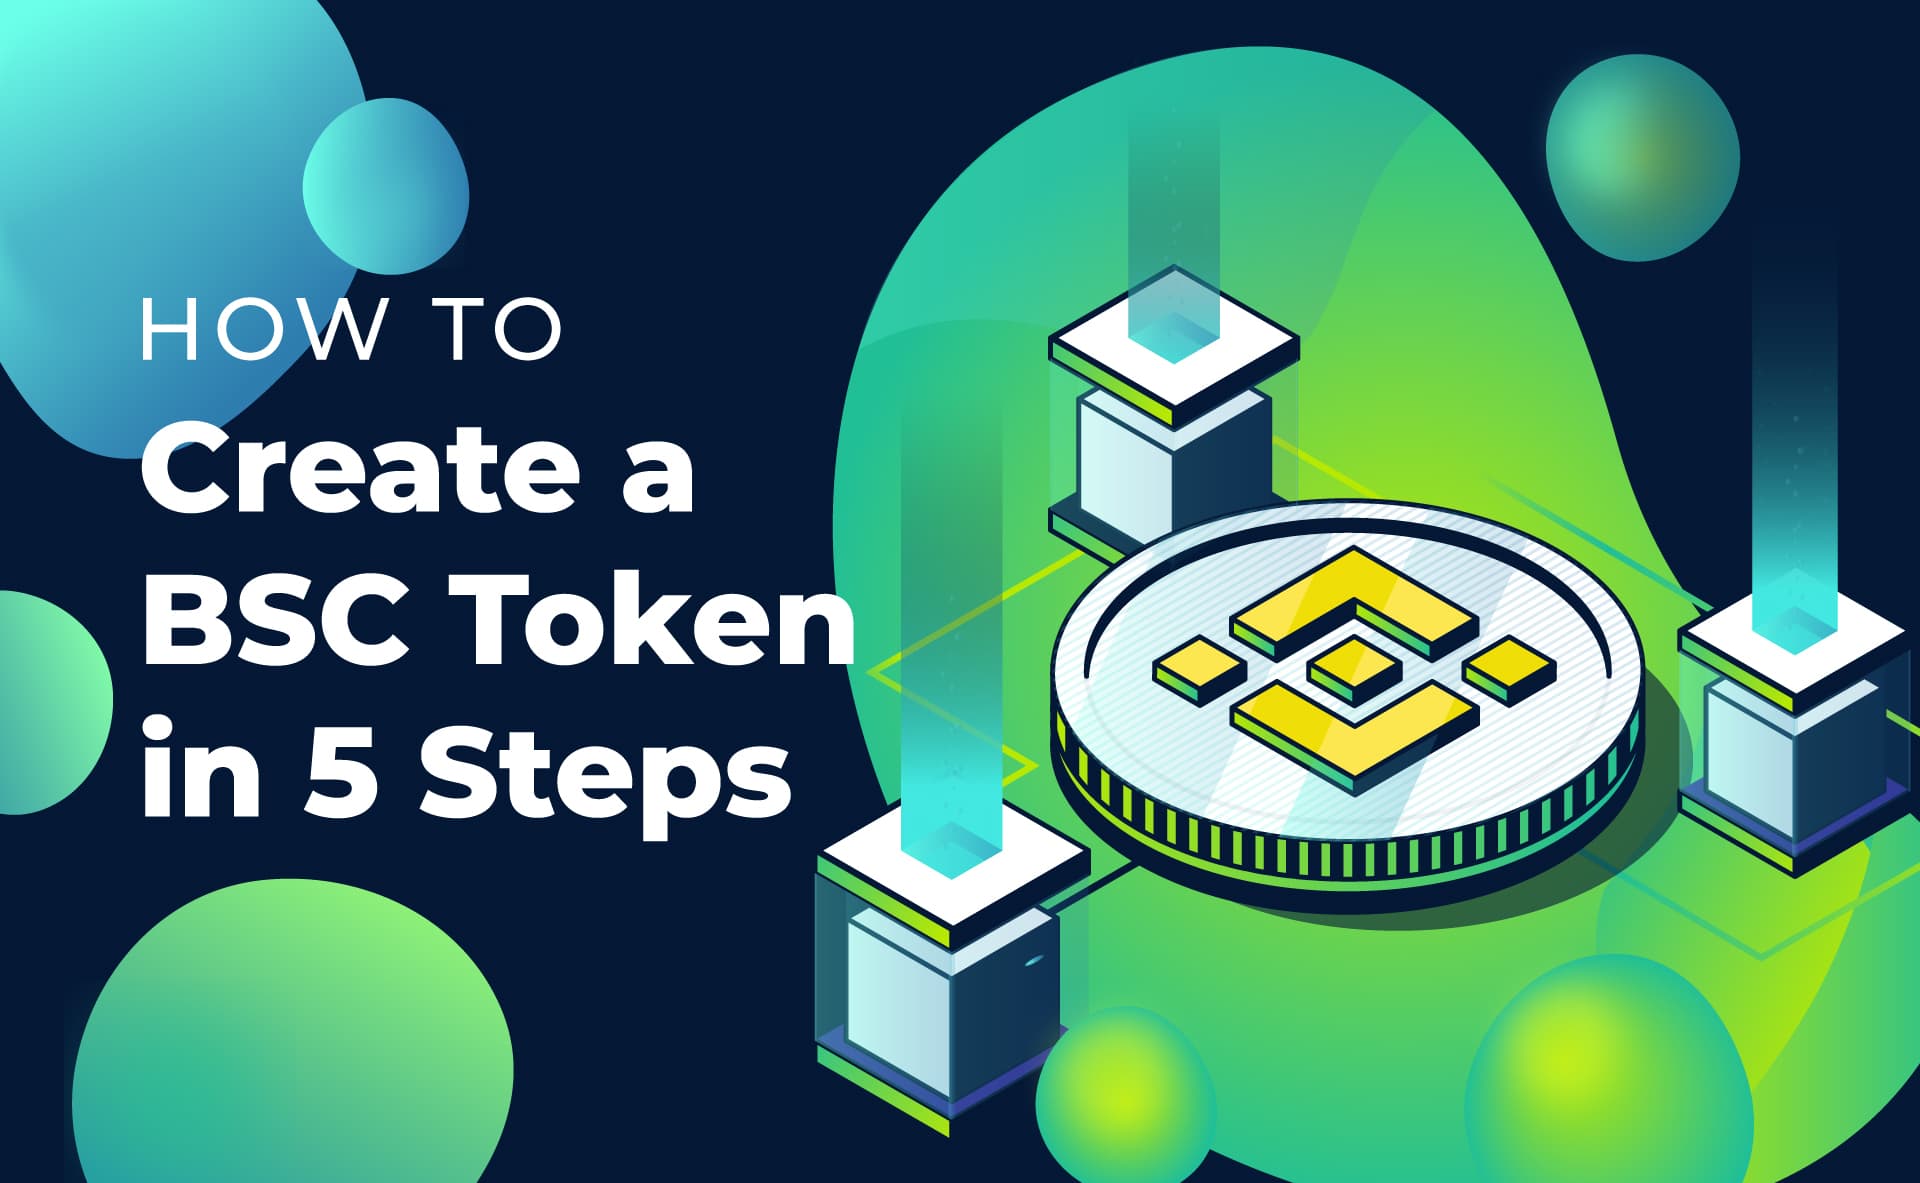 How to Create a BSC Token in 5 Steps » Moralis - The Ultimate Web3 Development Platform